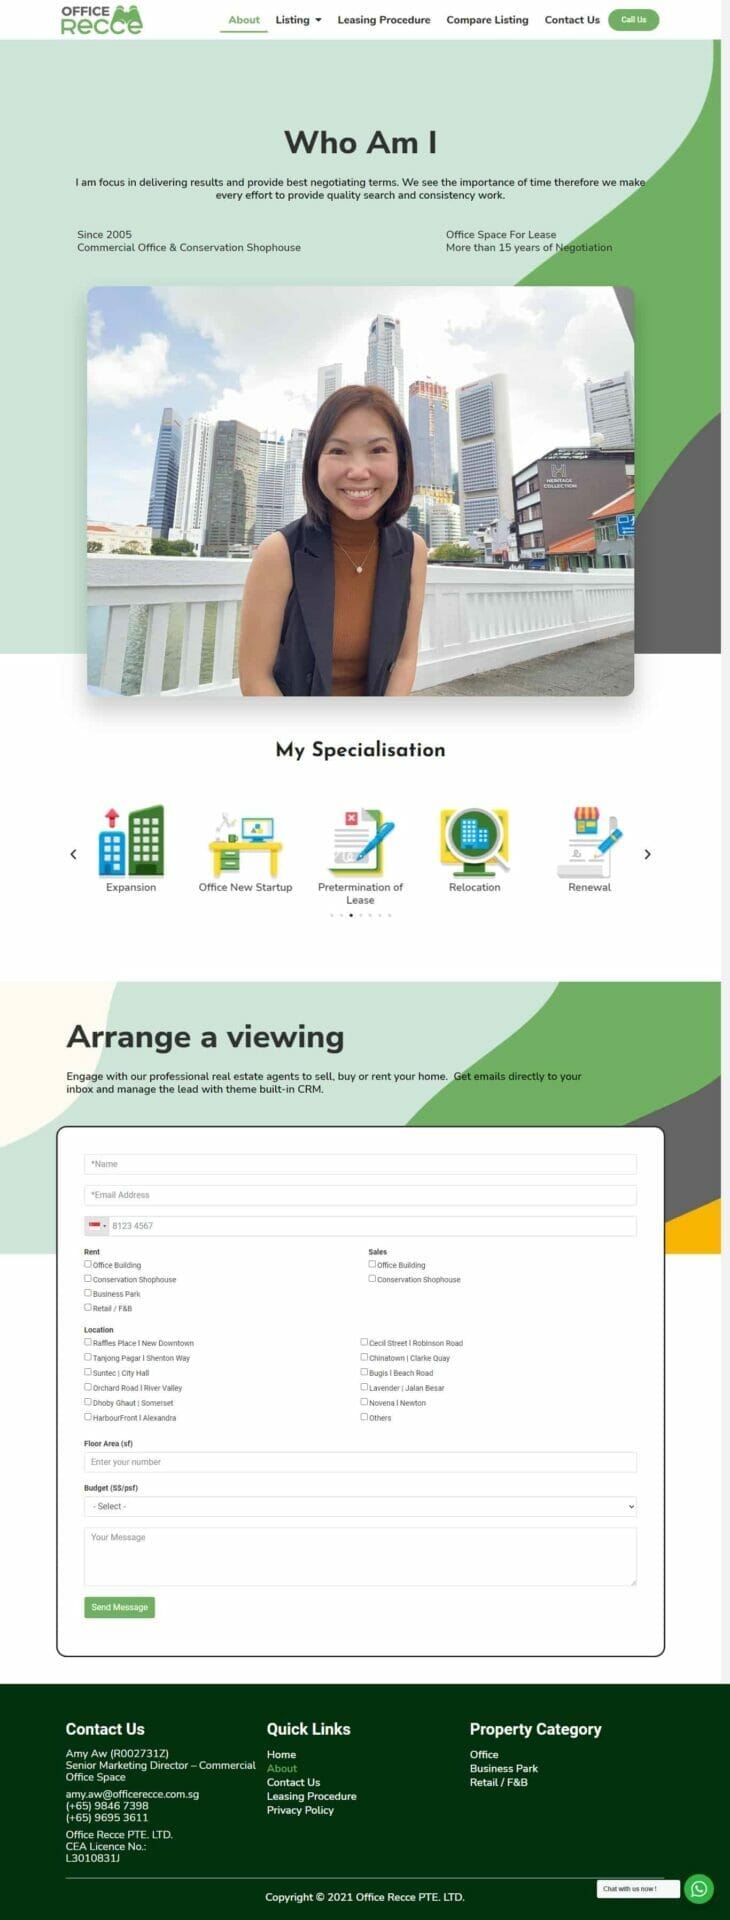 A WordPress website featuring a directory listing of property listings, with a green background and a woman's face.